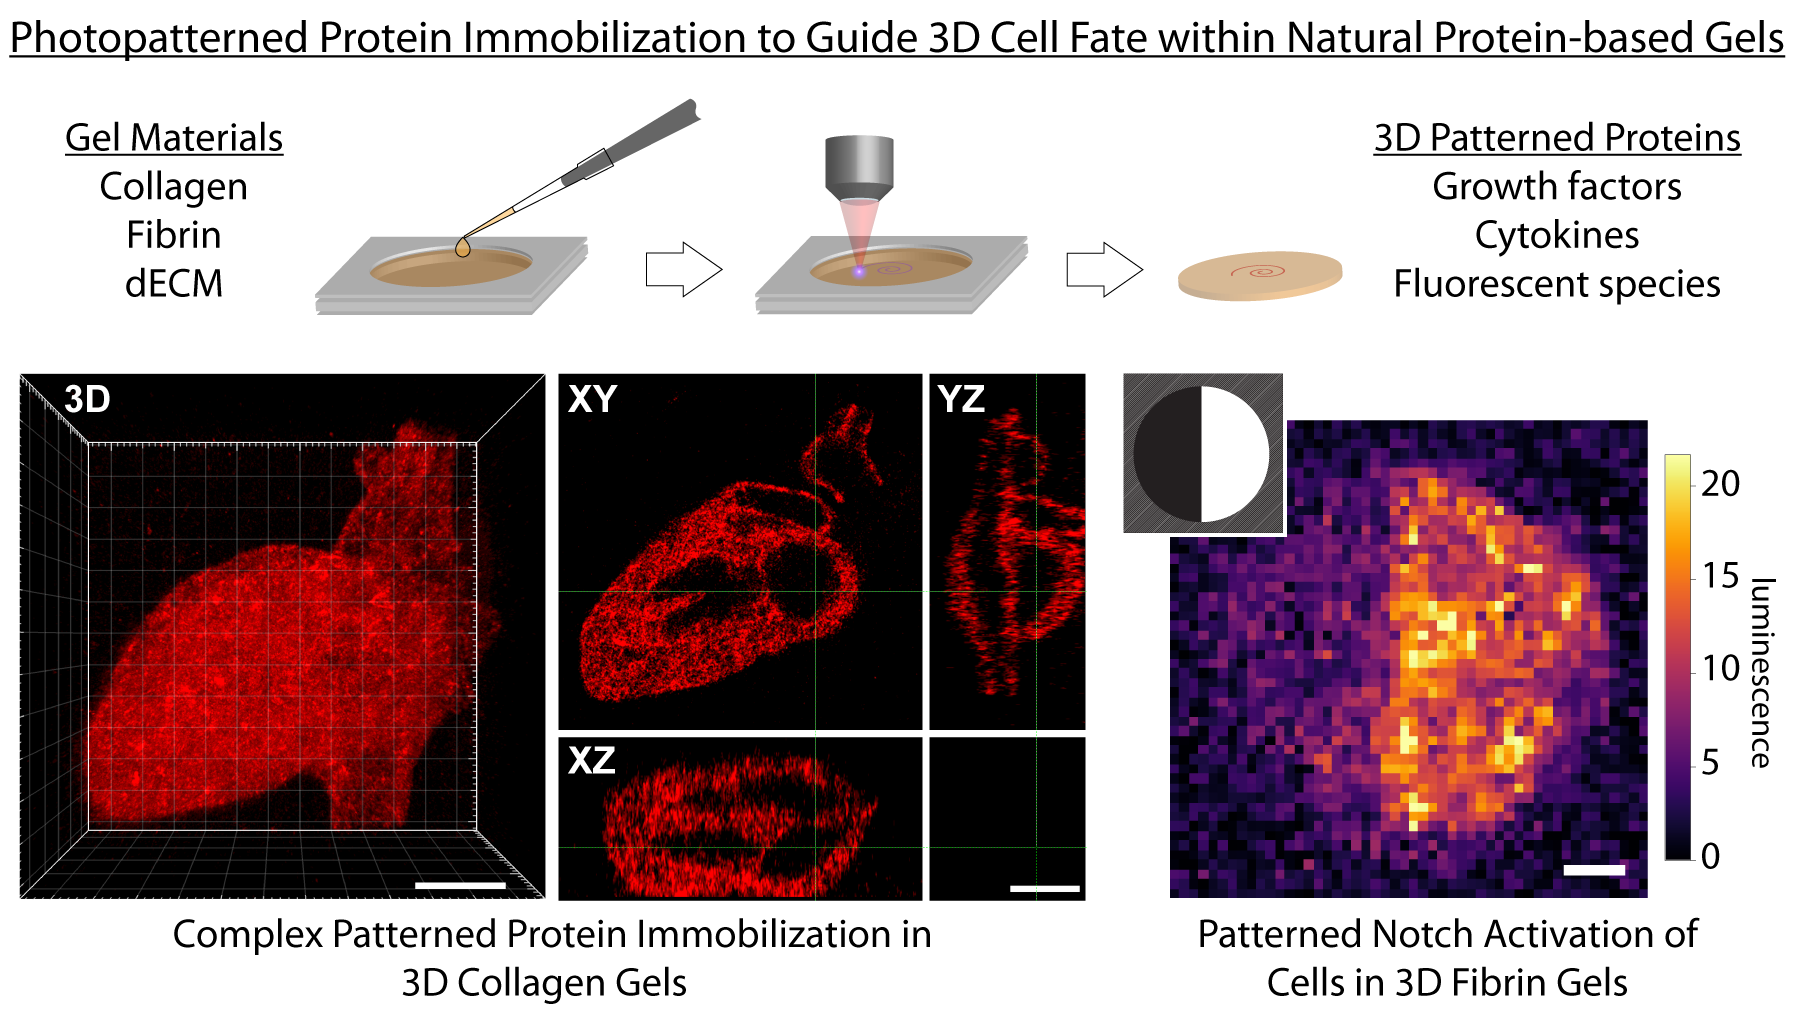 Photopatterned Biomolecule Immobilization to Guide 3D Cell Fate in Natural Protein-based Hydrogels